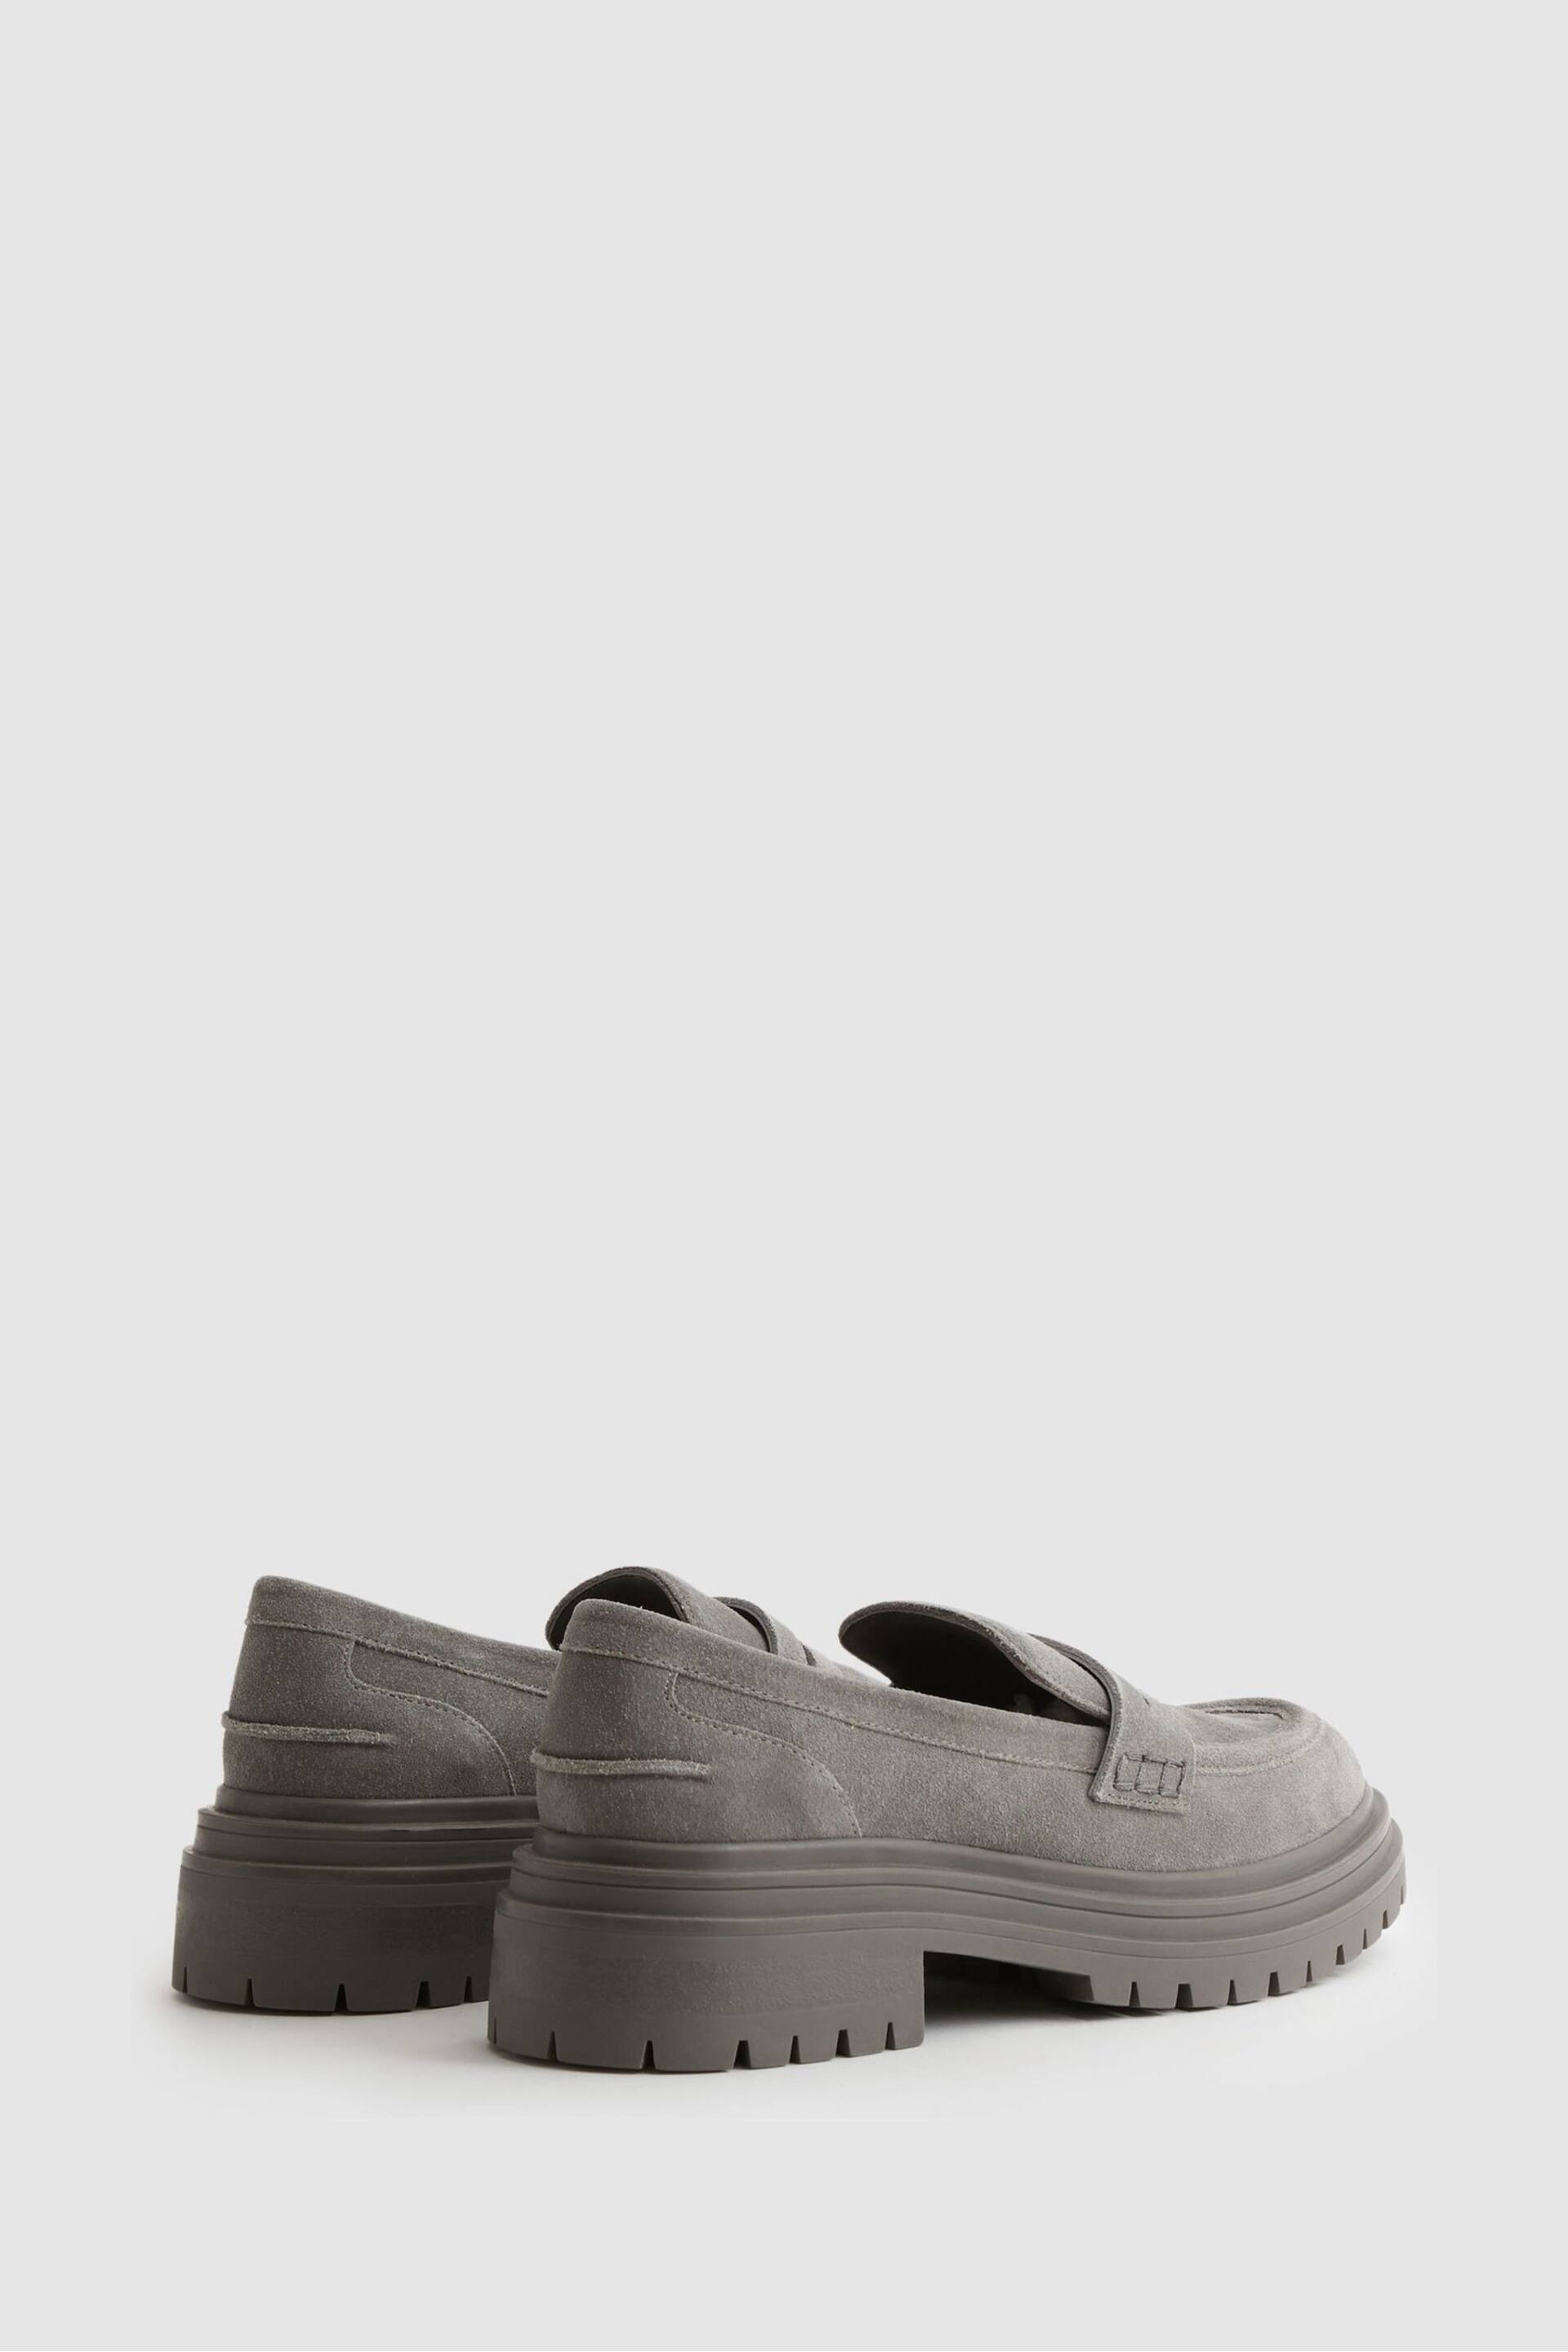 Reiss Grey Adele Leather Chunky Cleated Loafers - Image 4 of 5